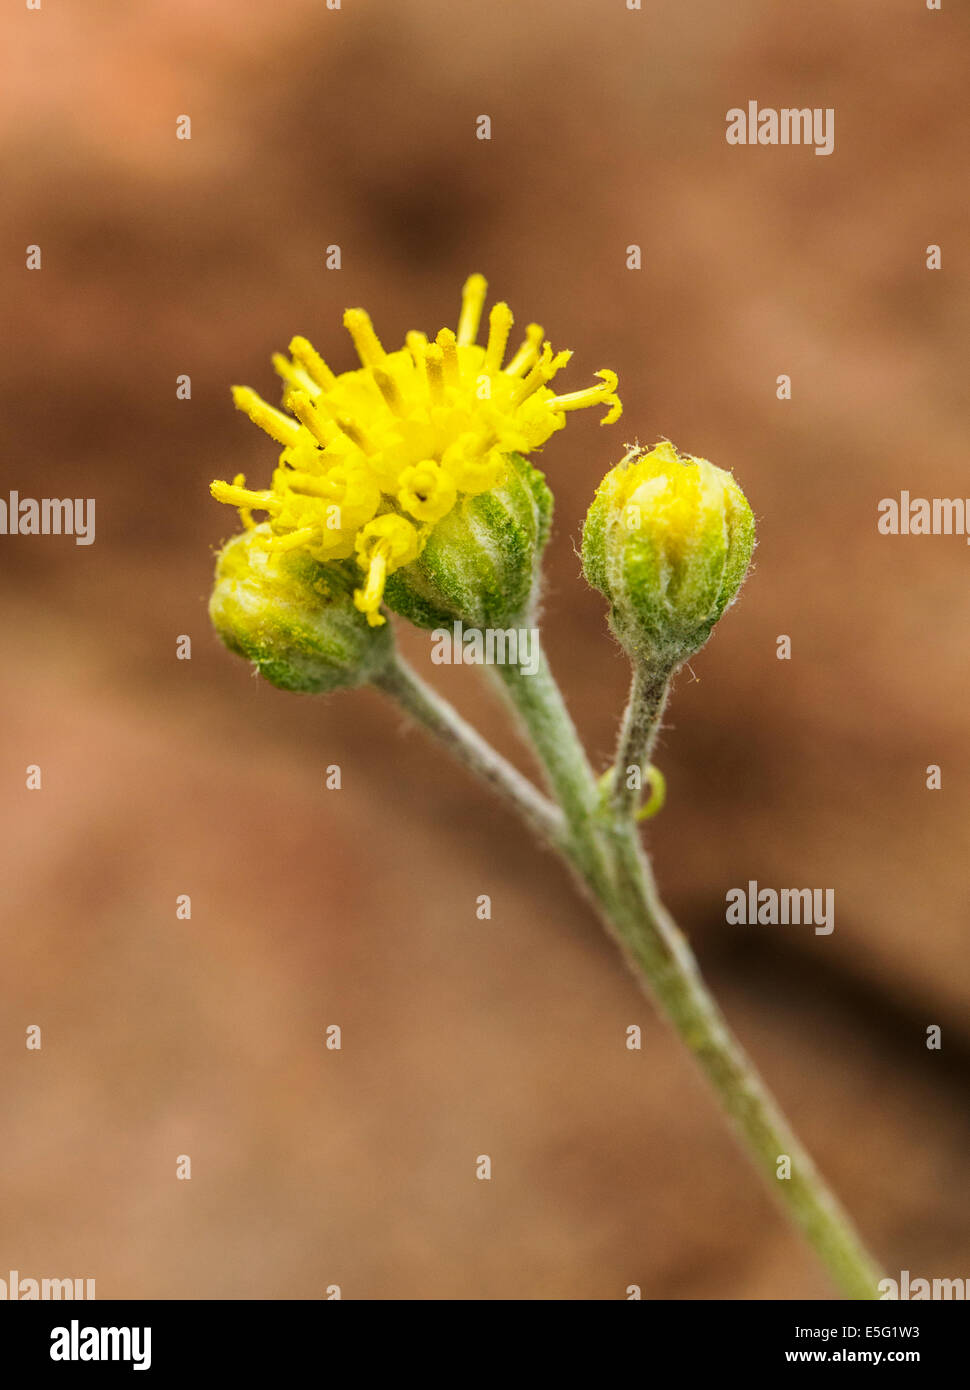 Hymenopappus filifolius; Asteraceae; Sunflower Family; Dusty Maiden; wildflowers in bloom, Central Colorado, USA Stock Photo